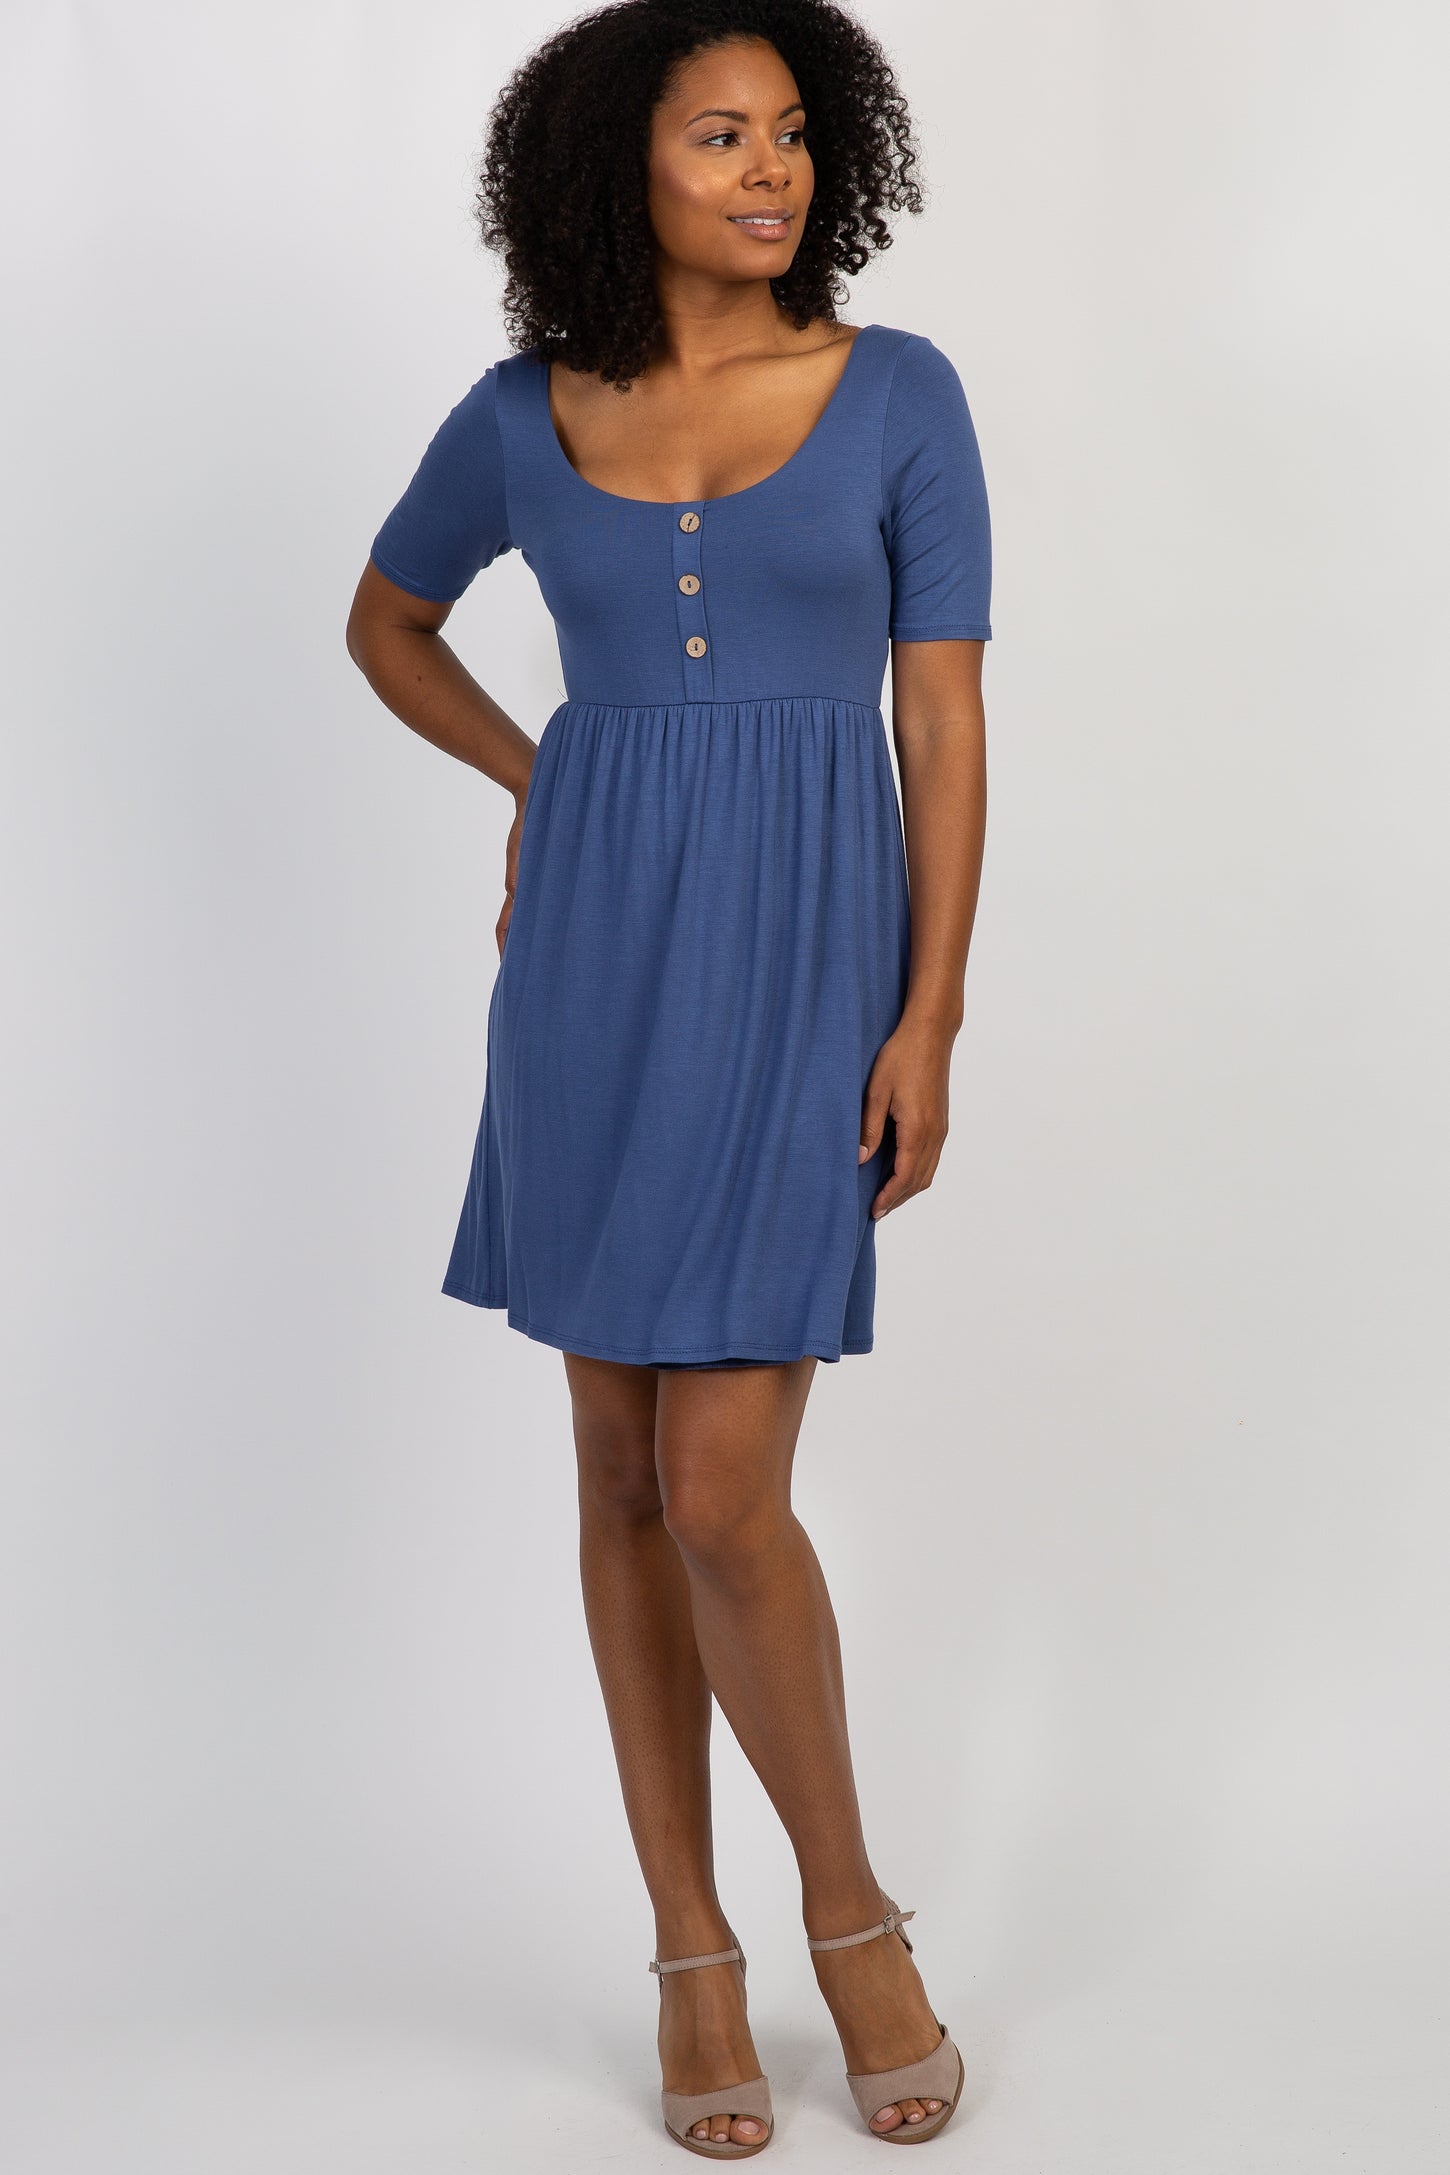 PinkBlush Navy Solid Button Front Maternity Dress